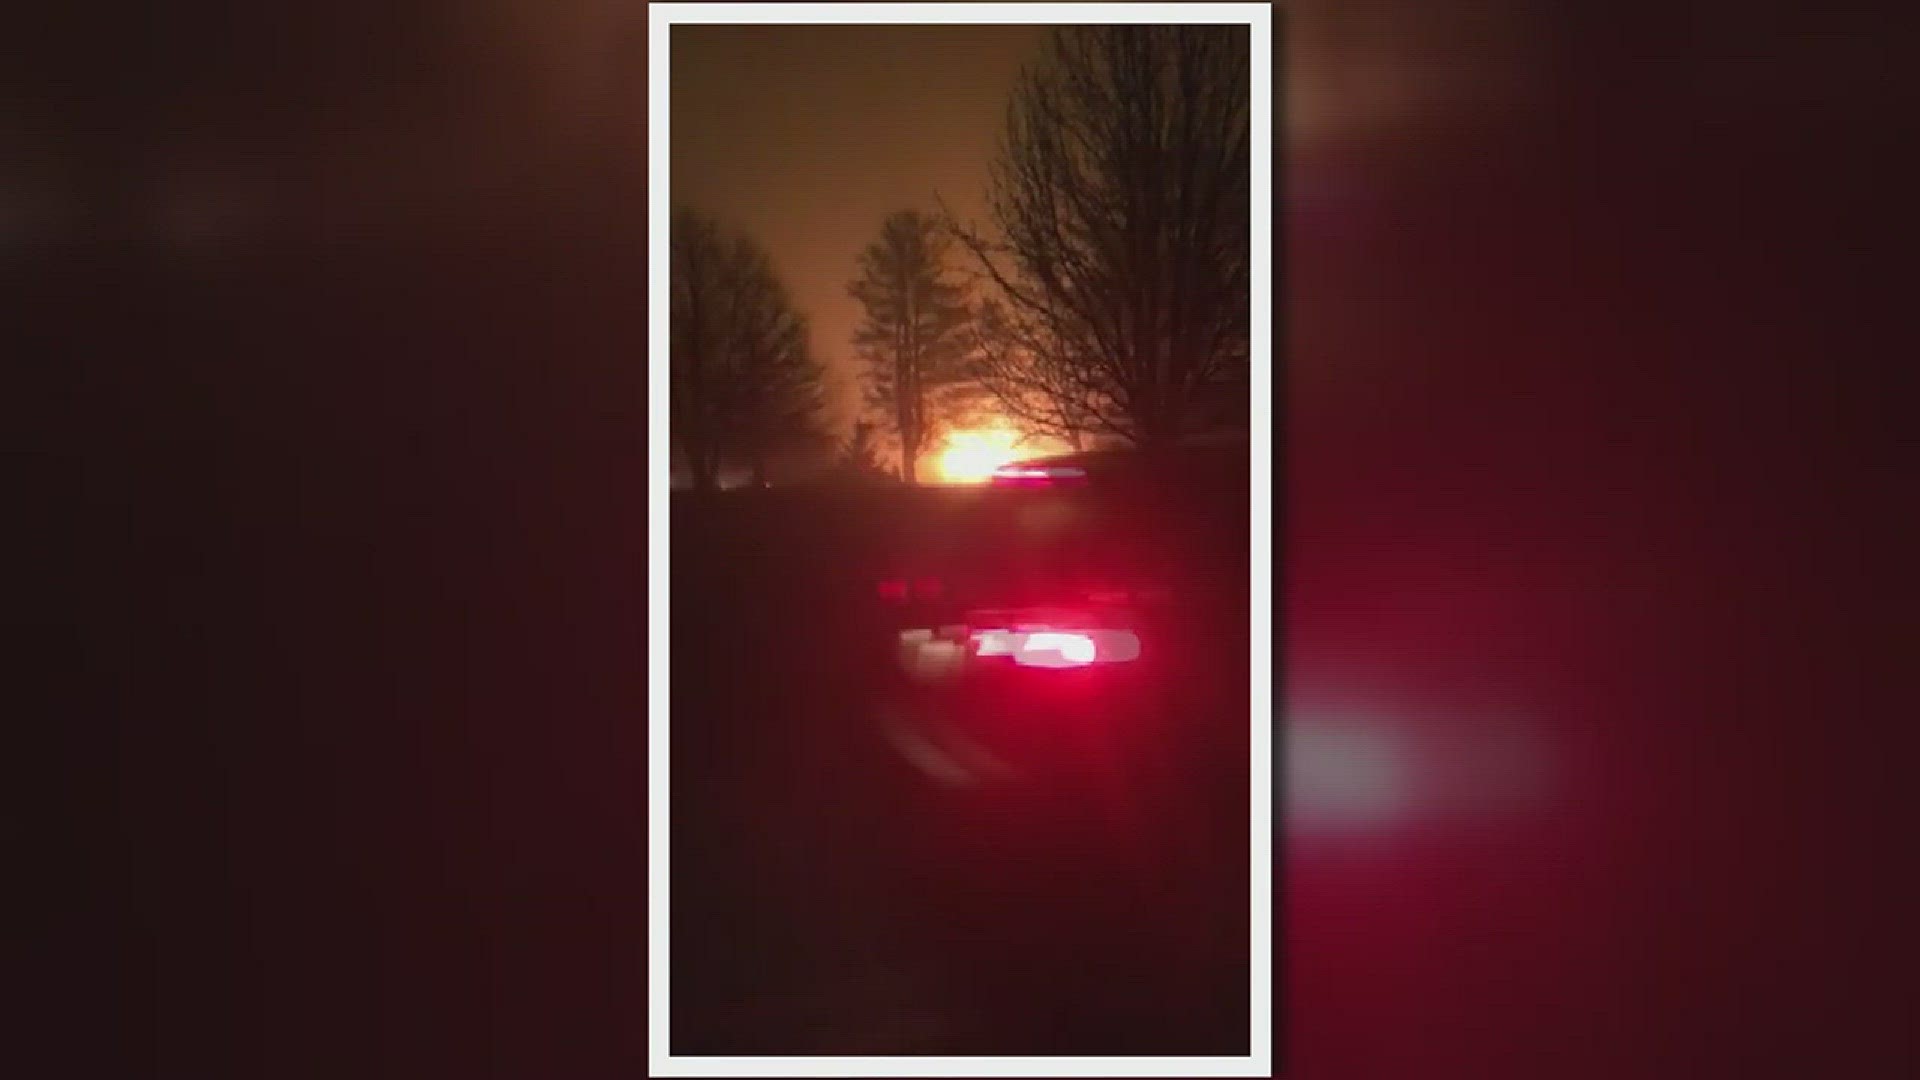 One person was hurt in a fire that erupted reportedly after an explosion was heard.